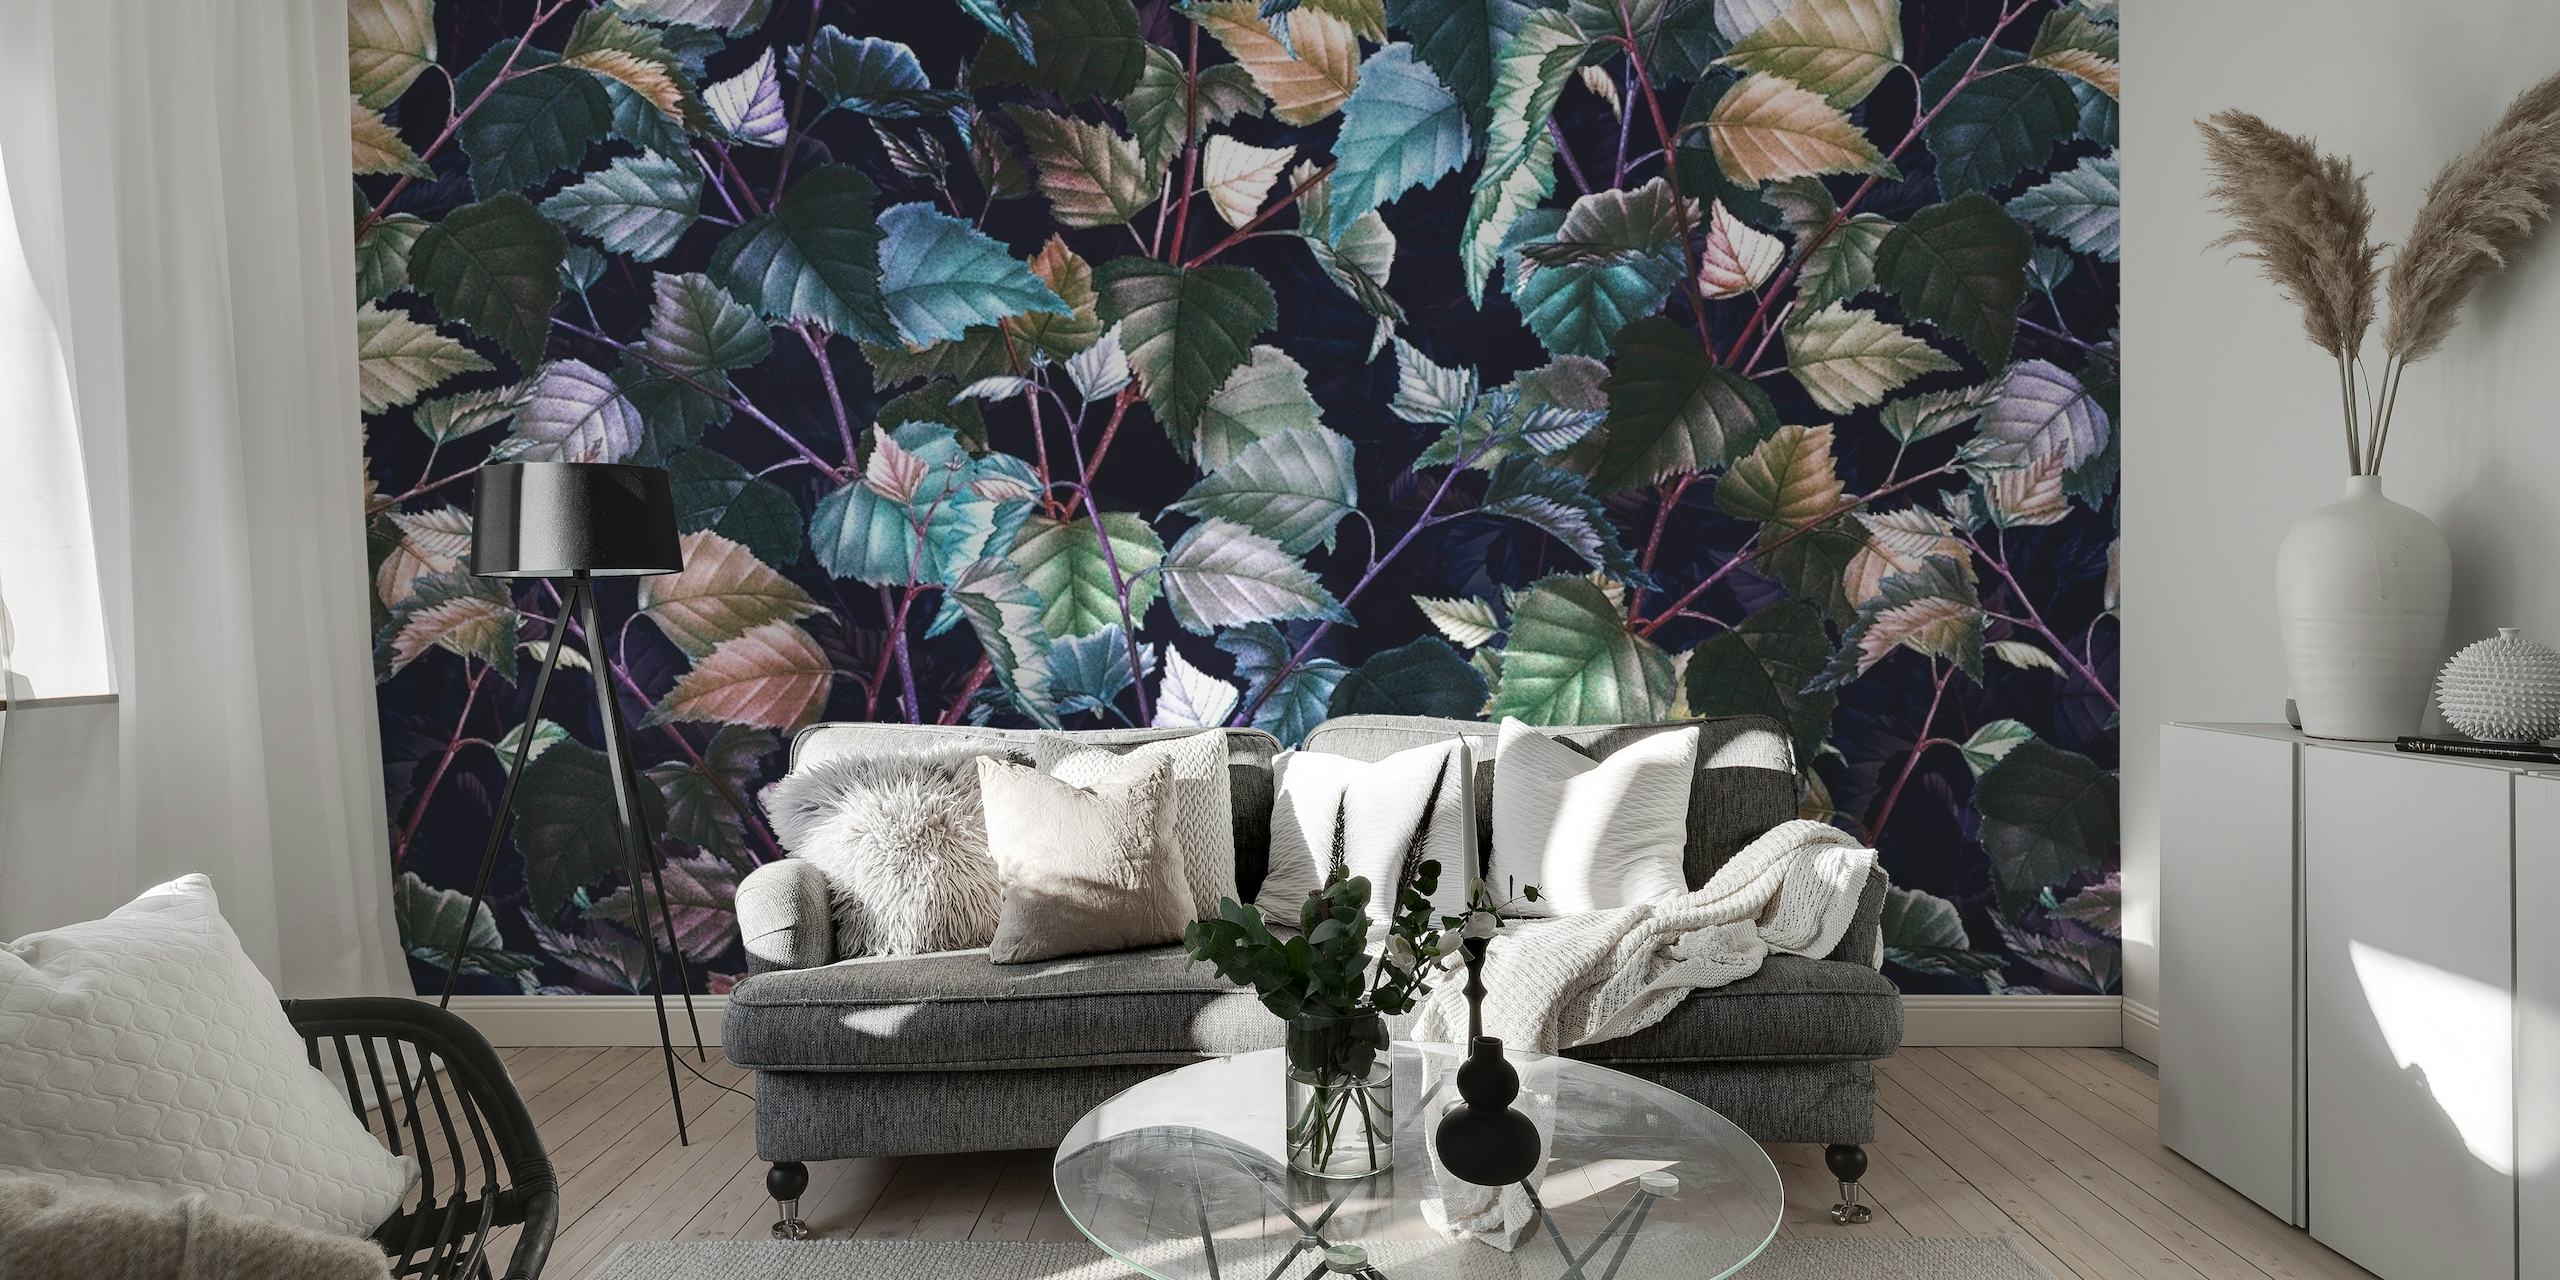 Leaves with shades of green, teal, and purple in 'Magical Forest III' wall mural